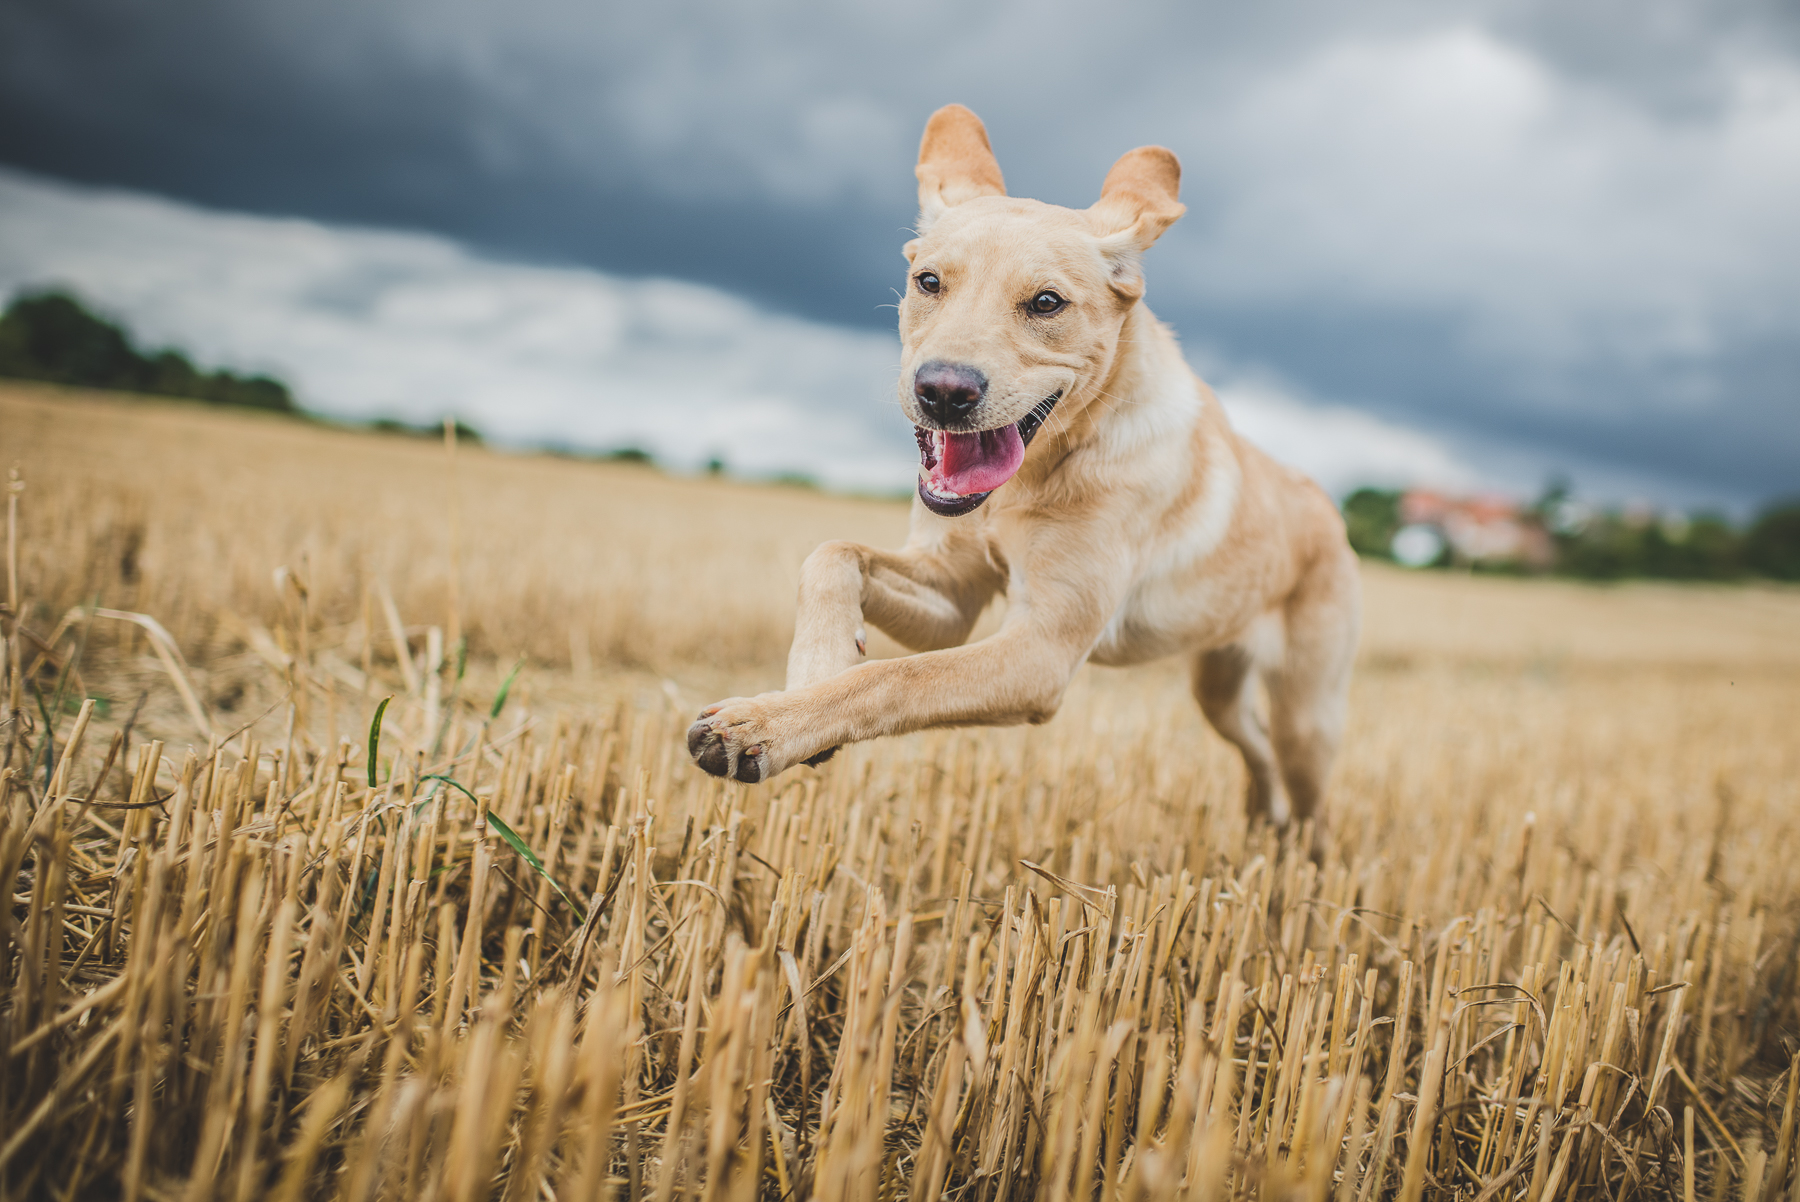 Dog running through a harvested field